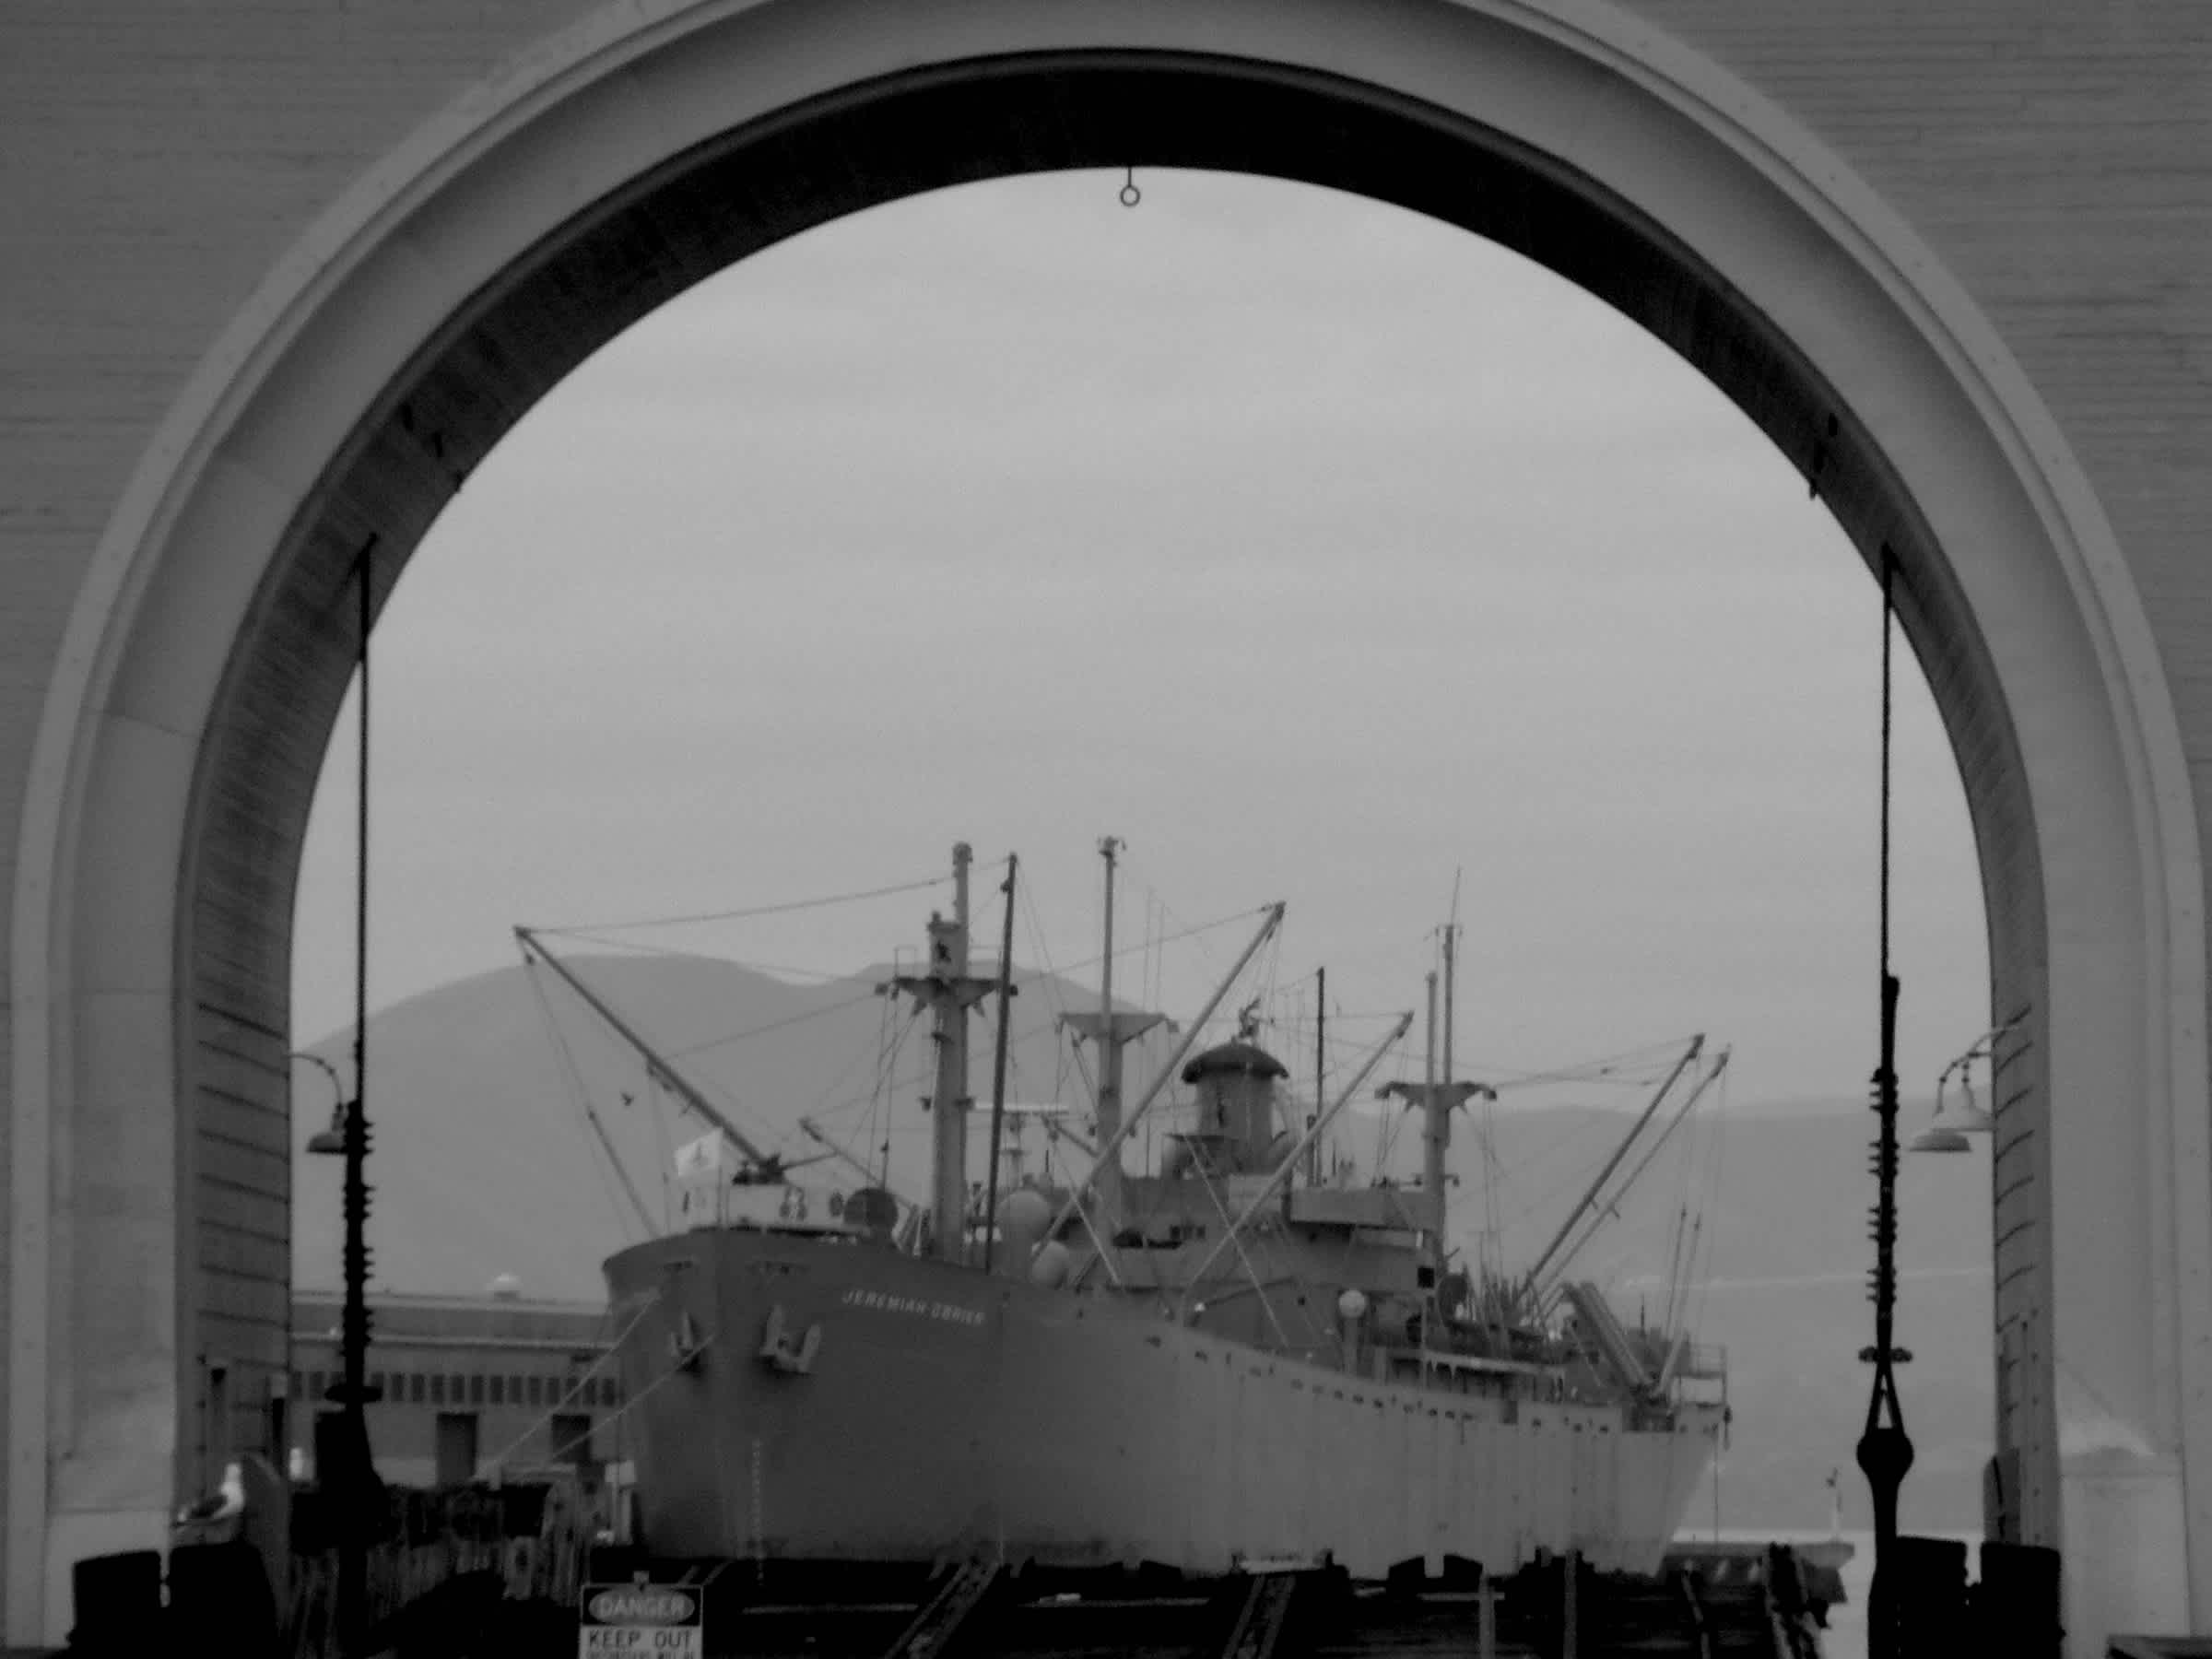 Boat resting in the water underneath building archway in black and white in Embarcadero, San Francisco, California.  